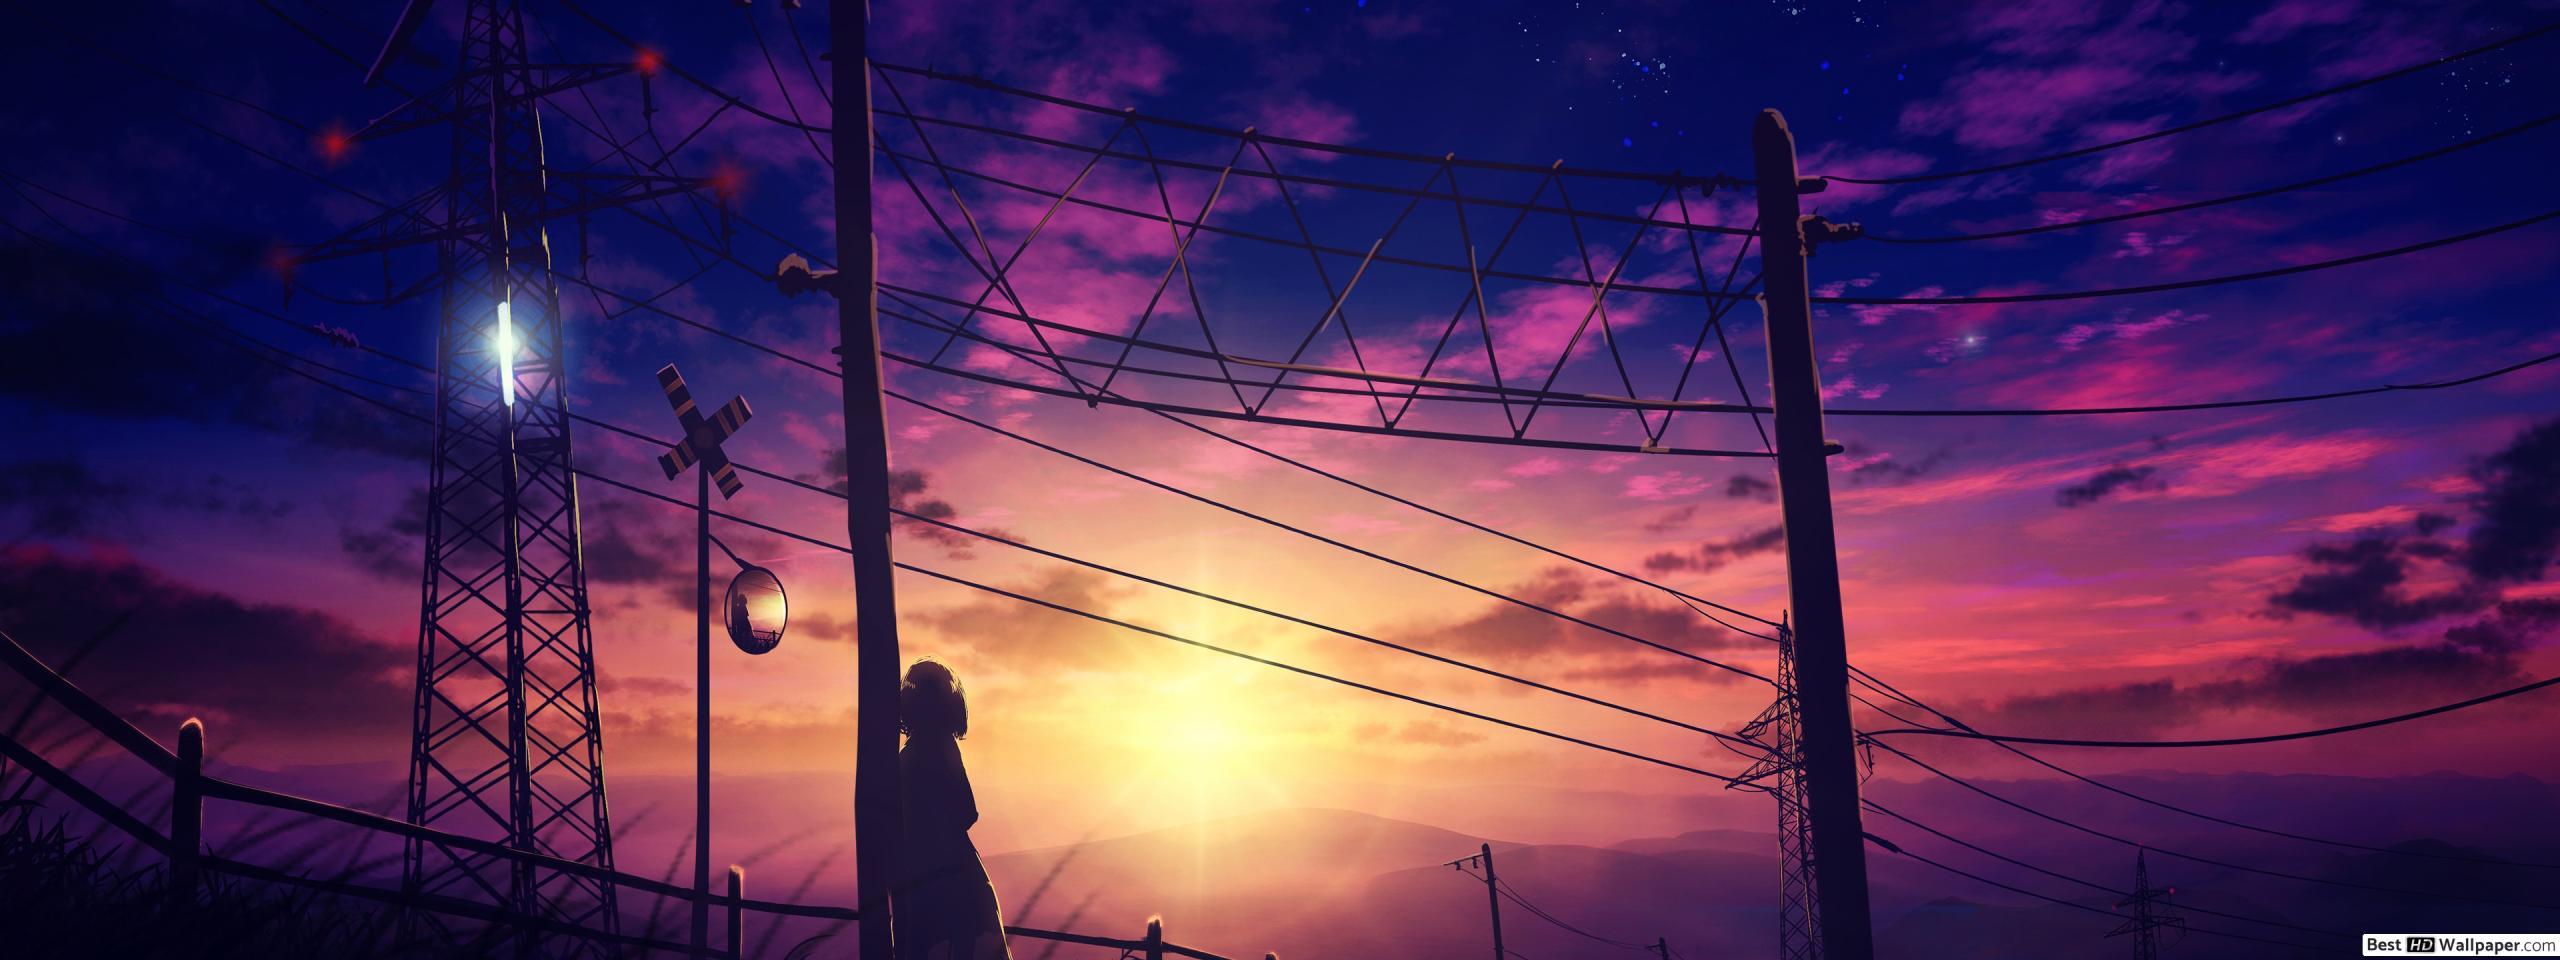 Anime Aesthetic Sunset Wallpapers - Top Free Anime Aesthetic Sunset ...